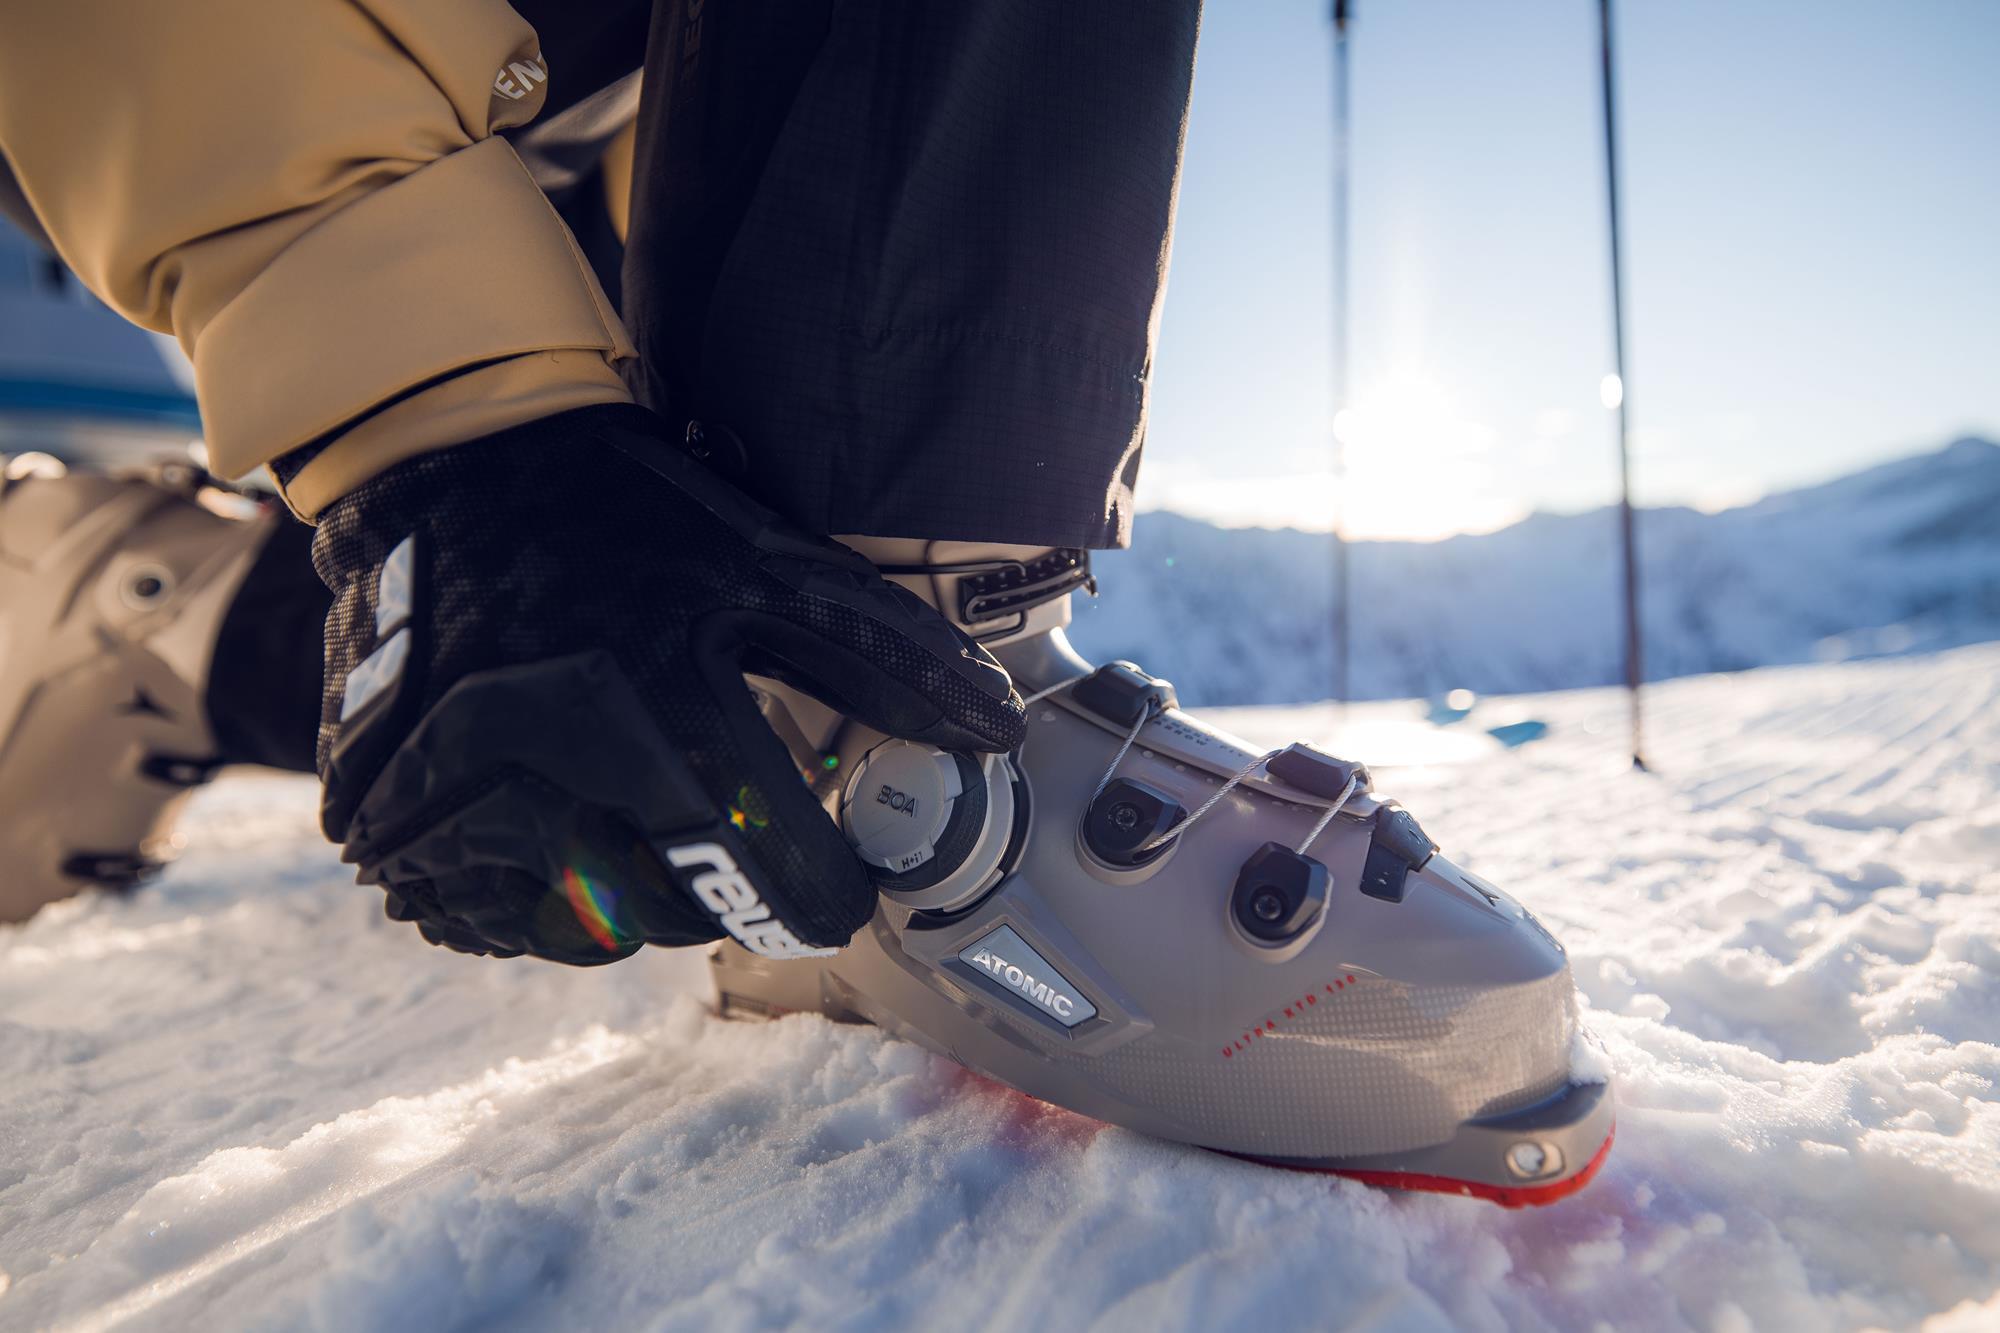 Four brands present ski boots with Boa Fit System